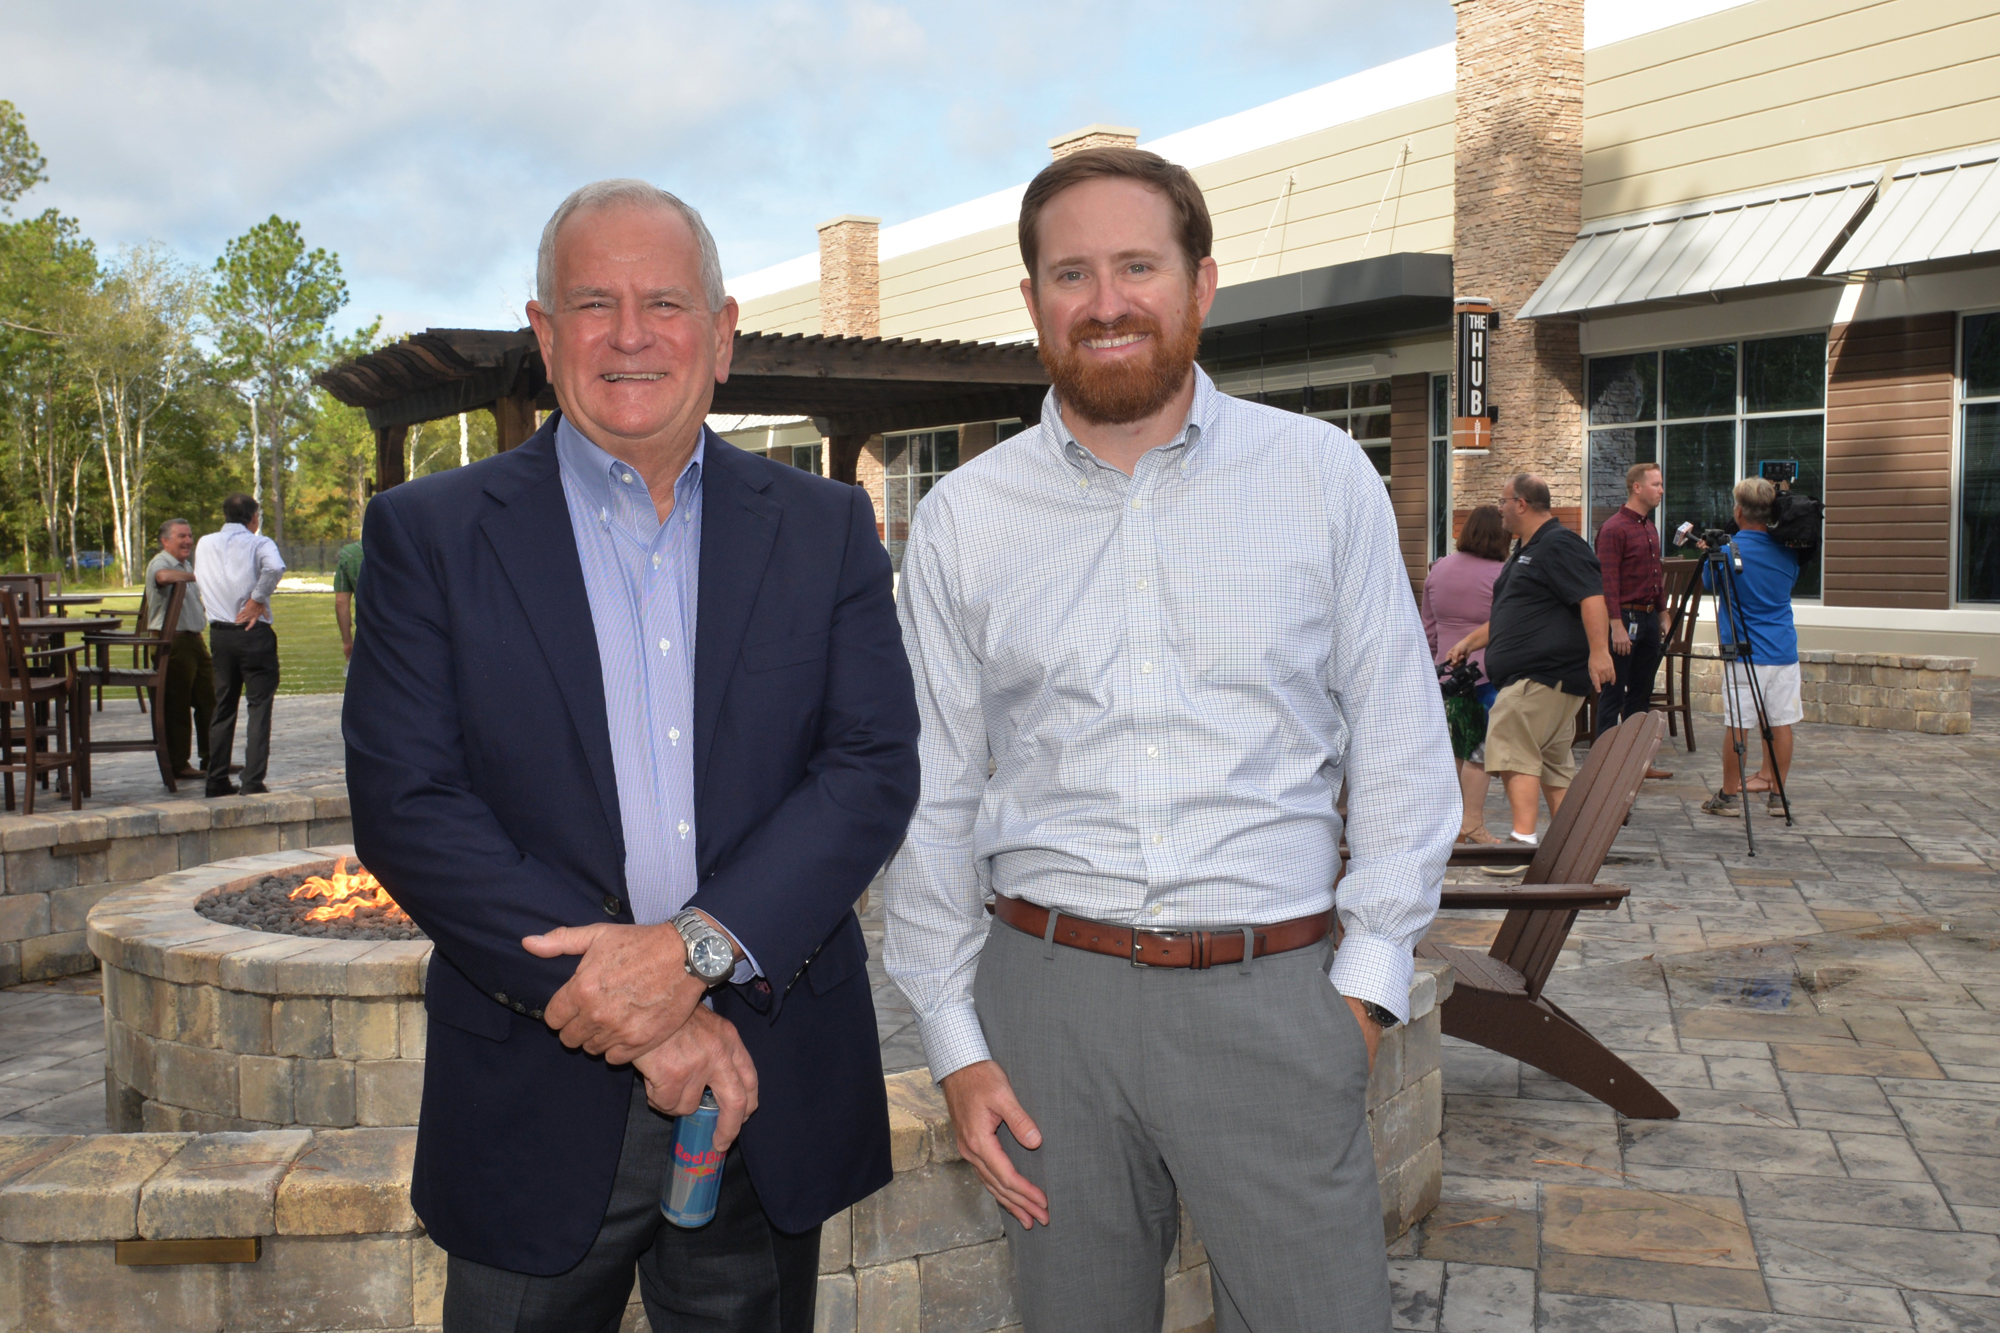 Earl Benton and his son, Jacob, at the grand opening of the new Champion Brands headquarters. Jacob Benton is the general manager at Champion Brands and is designated to succeed his father, who is president and CEO.